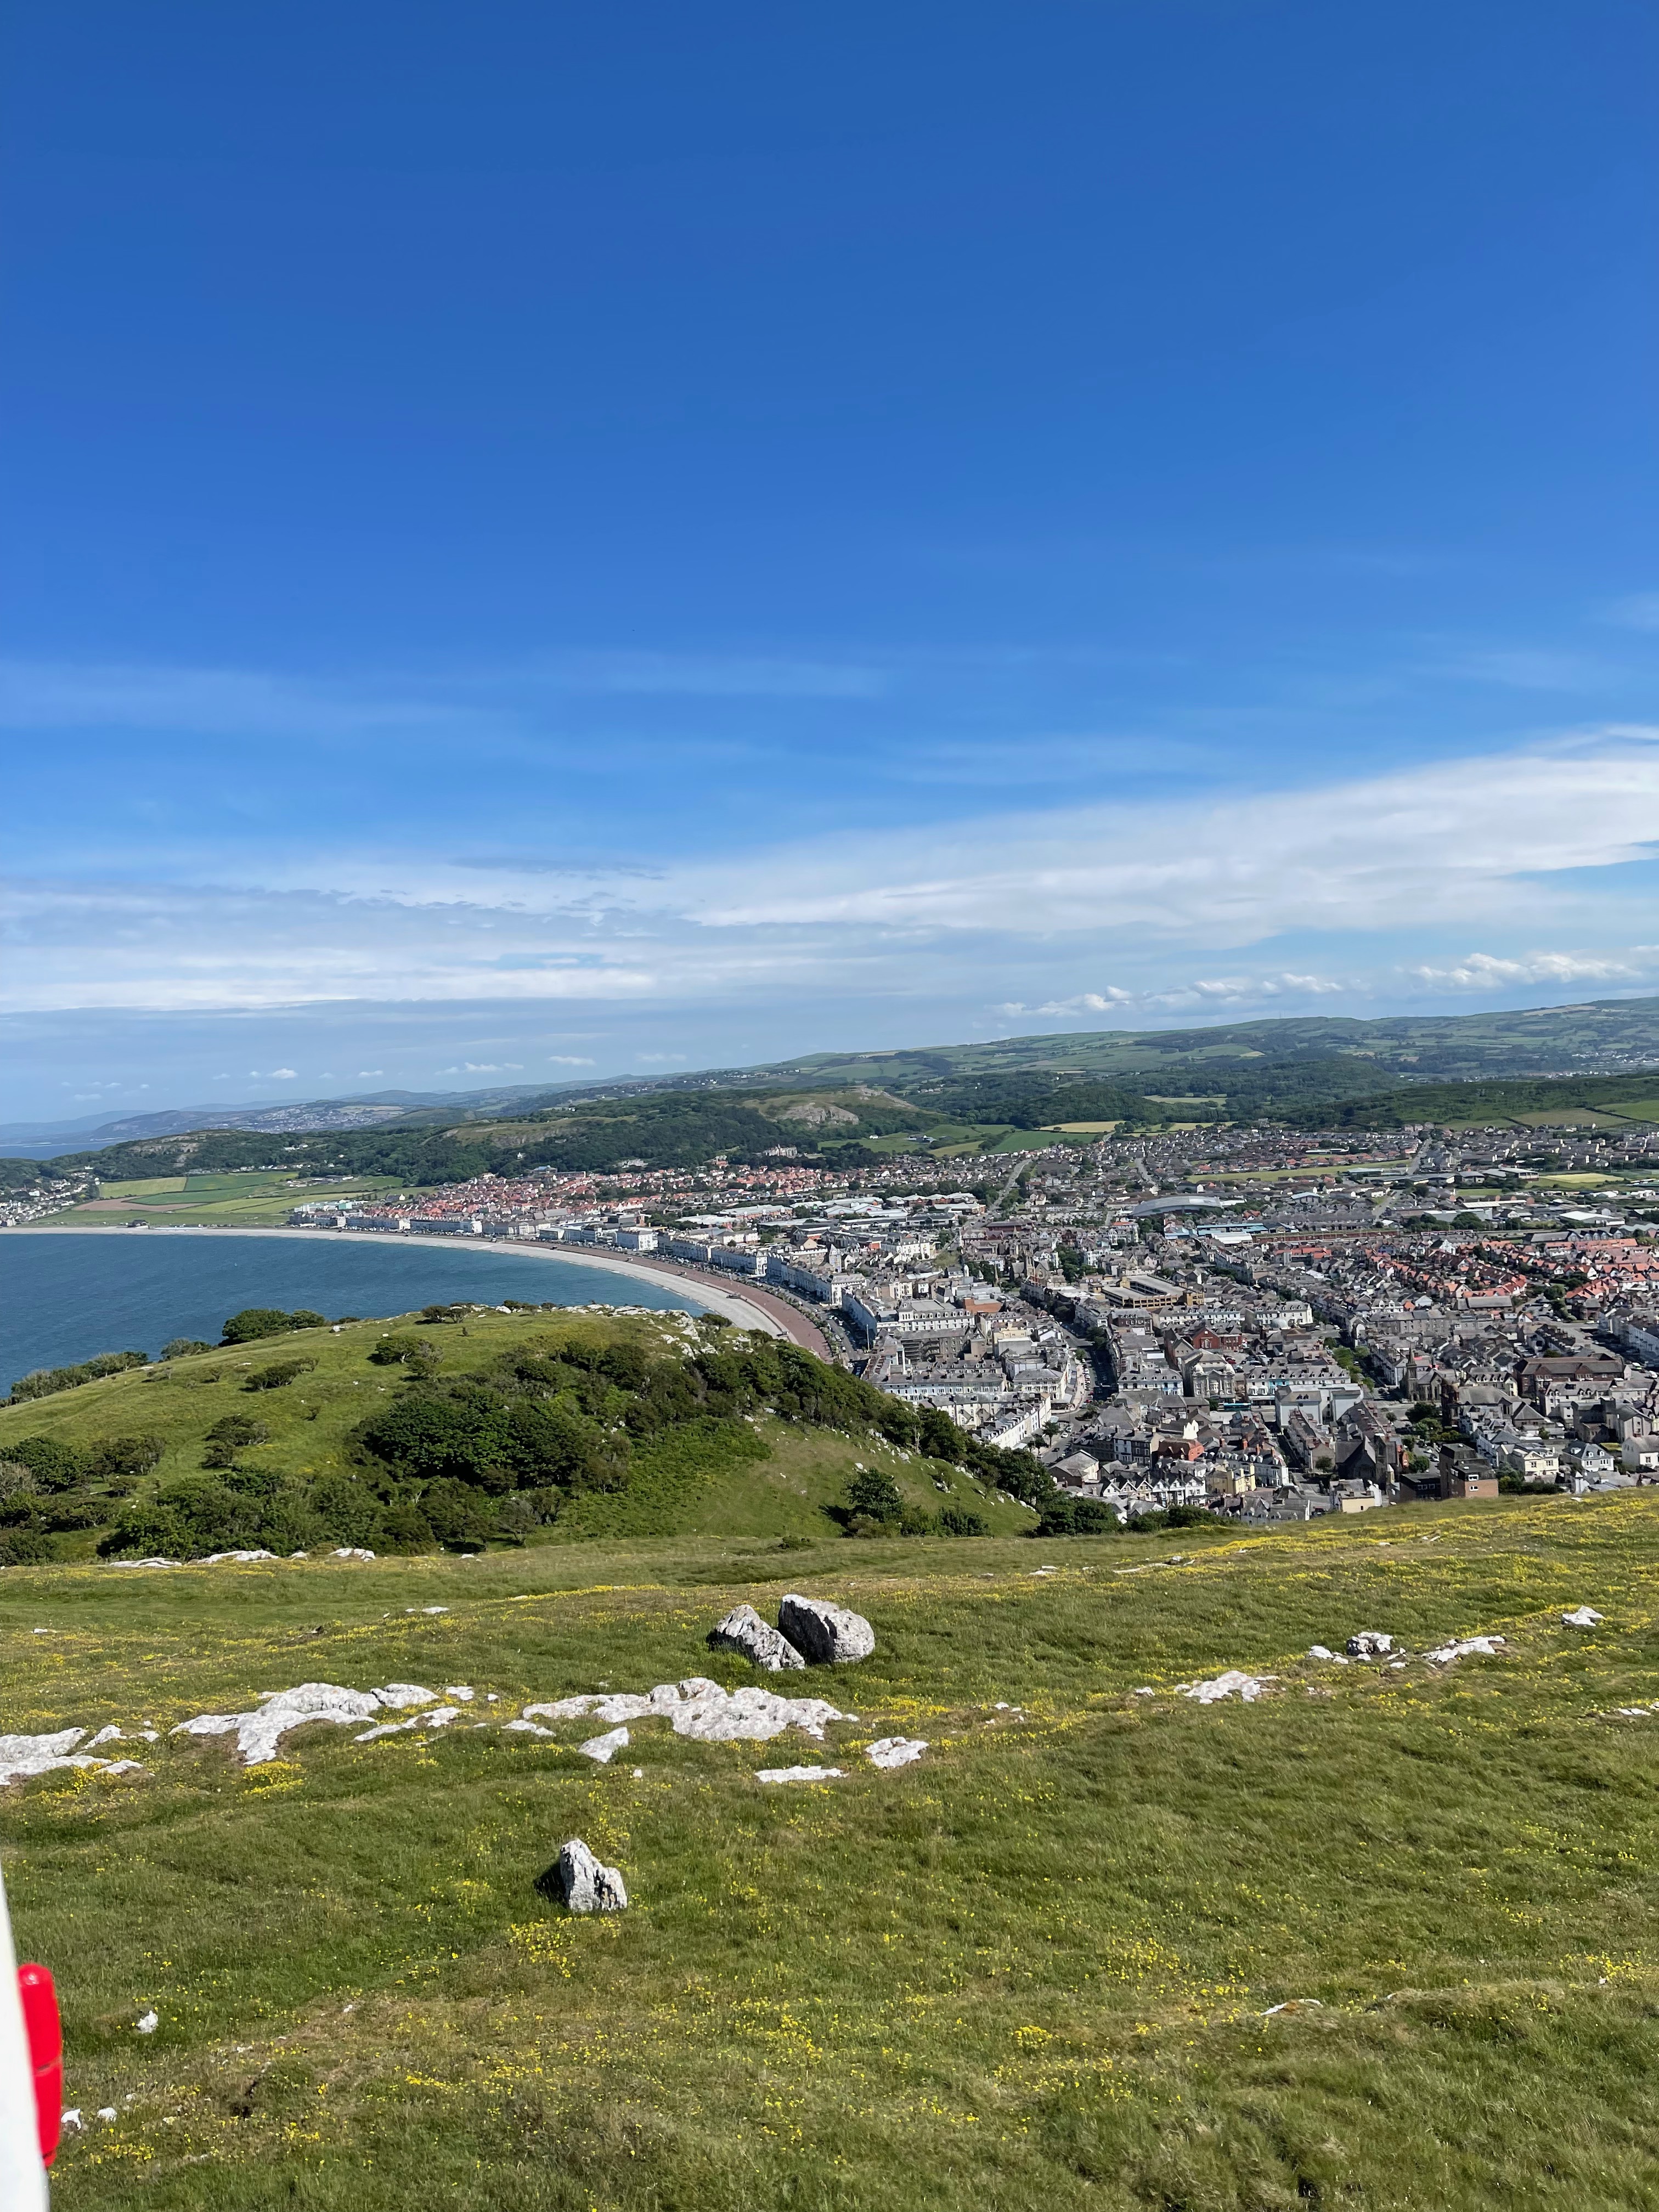 A visit to Llandudno and around: What to see and do